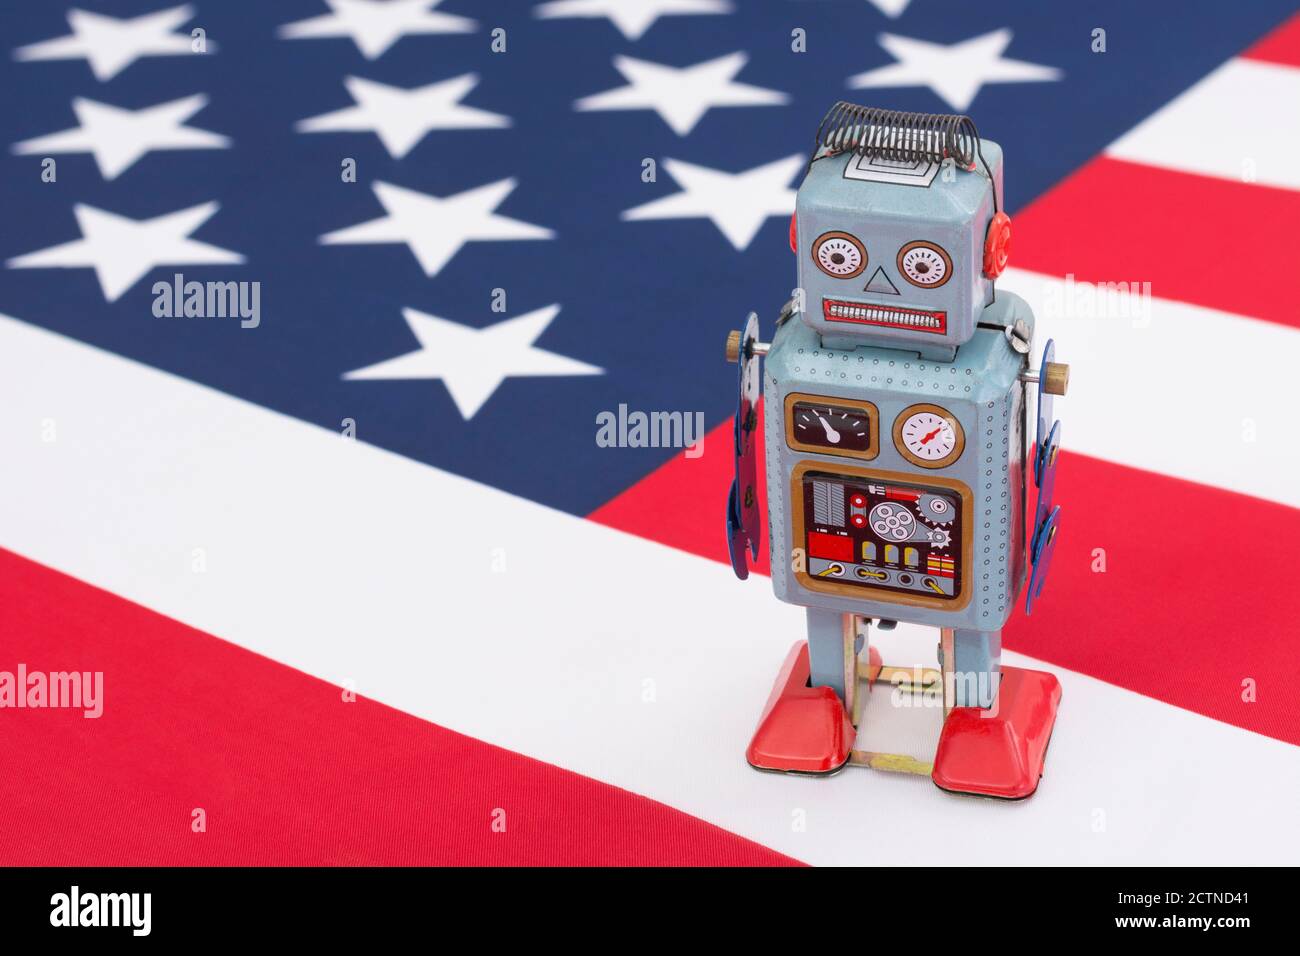 Clockwork toy robot on American flag / Stars & Stripes. For Russian Vulkan bots meddling in US election, Russian trolls bots, cyber threat to US Stock Photo